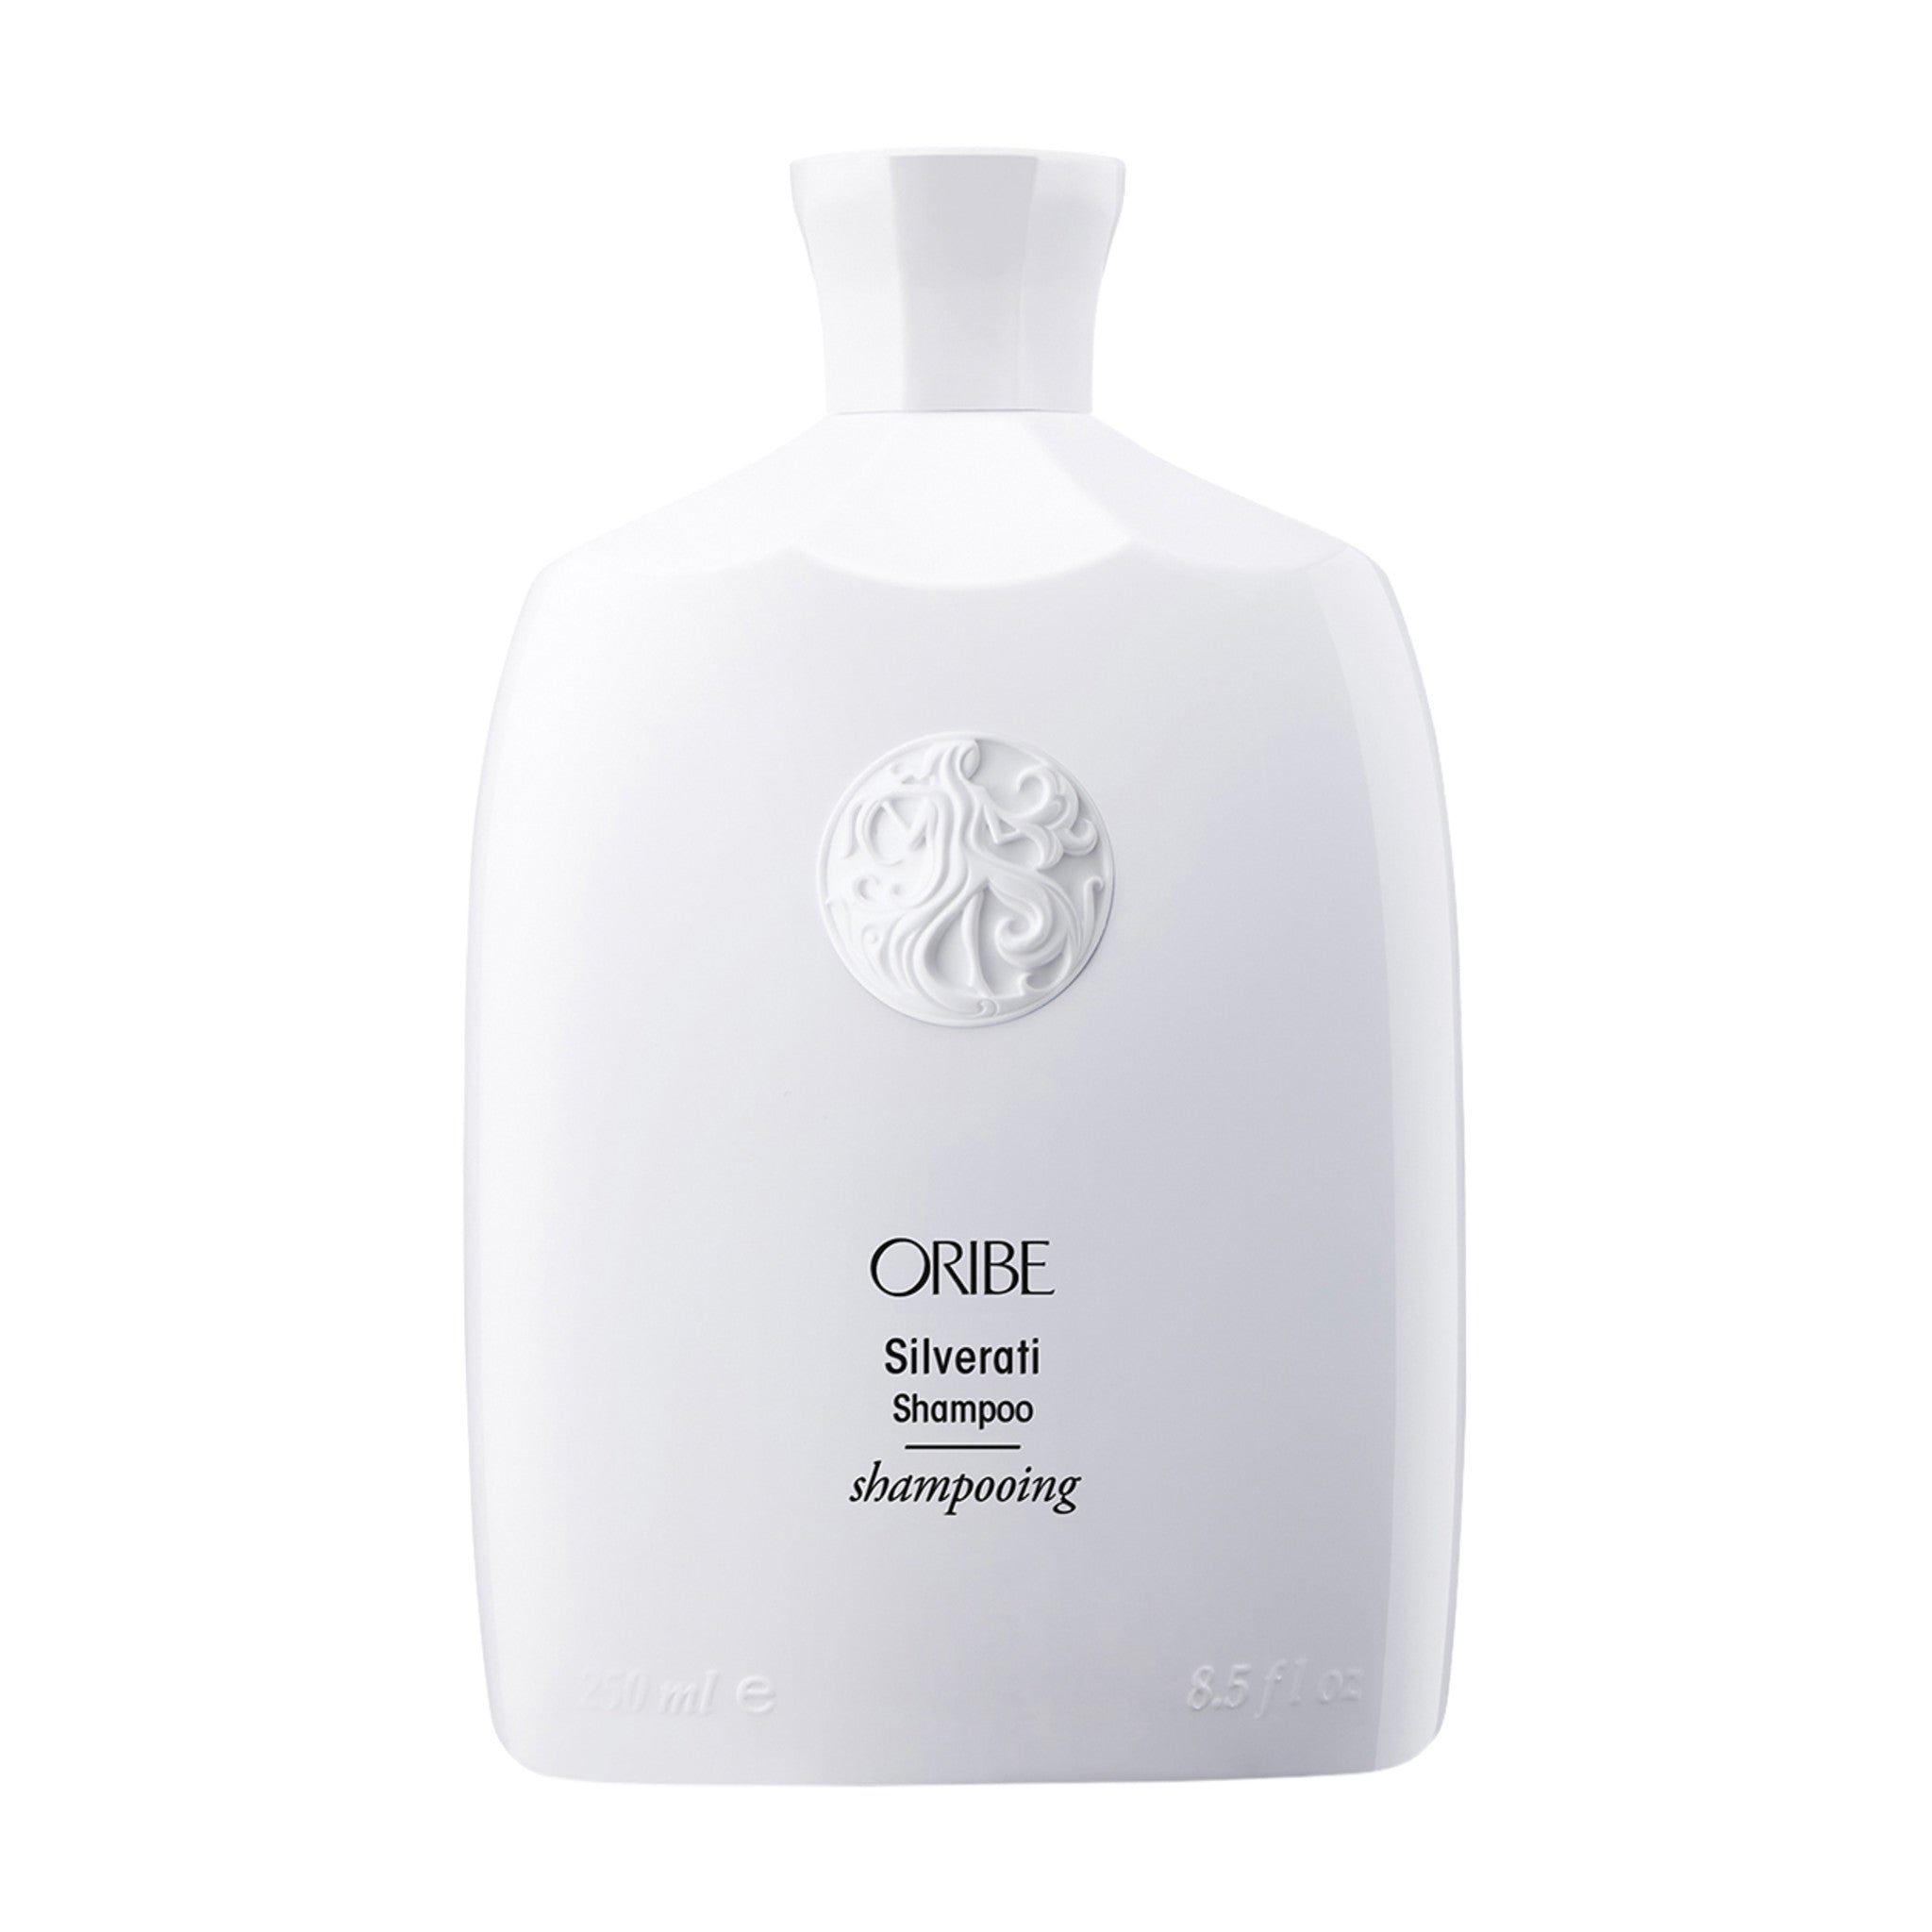 Oribe Silverati Shampoo main image. This product is for gray hair